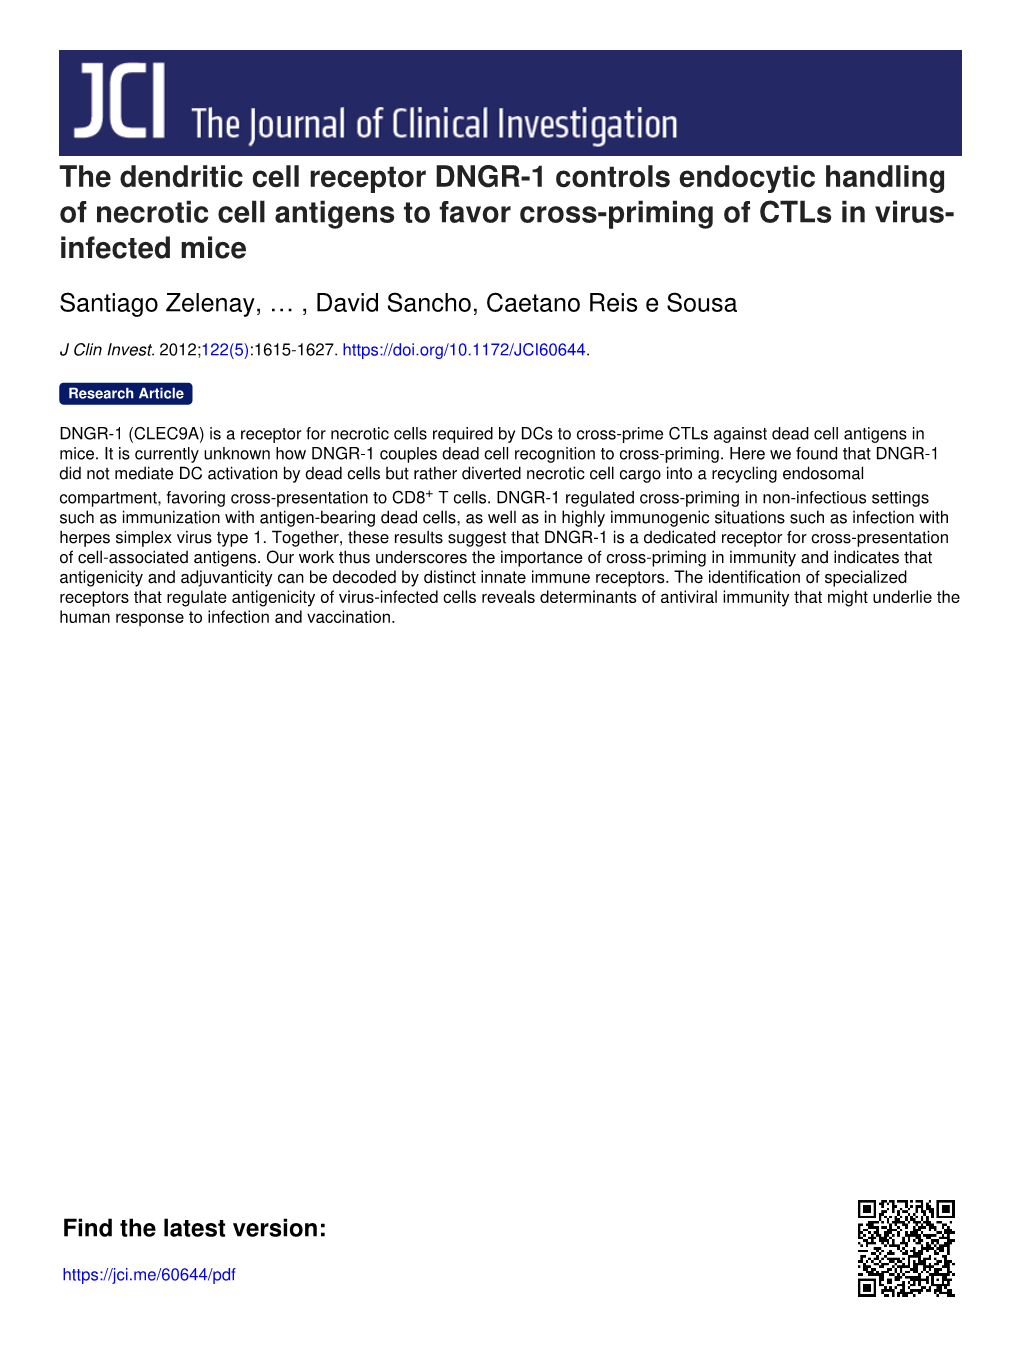 The Dendritic Cell Receptor DNGR-1 Controls Endocytic Handling of Necrotic Cell Antigens to Favor Cross-Priming of Ctls in Virus- Infected Mice